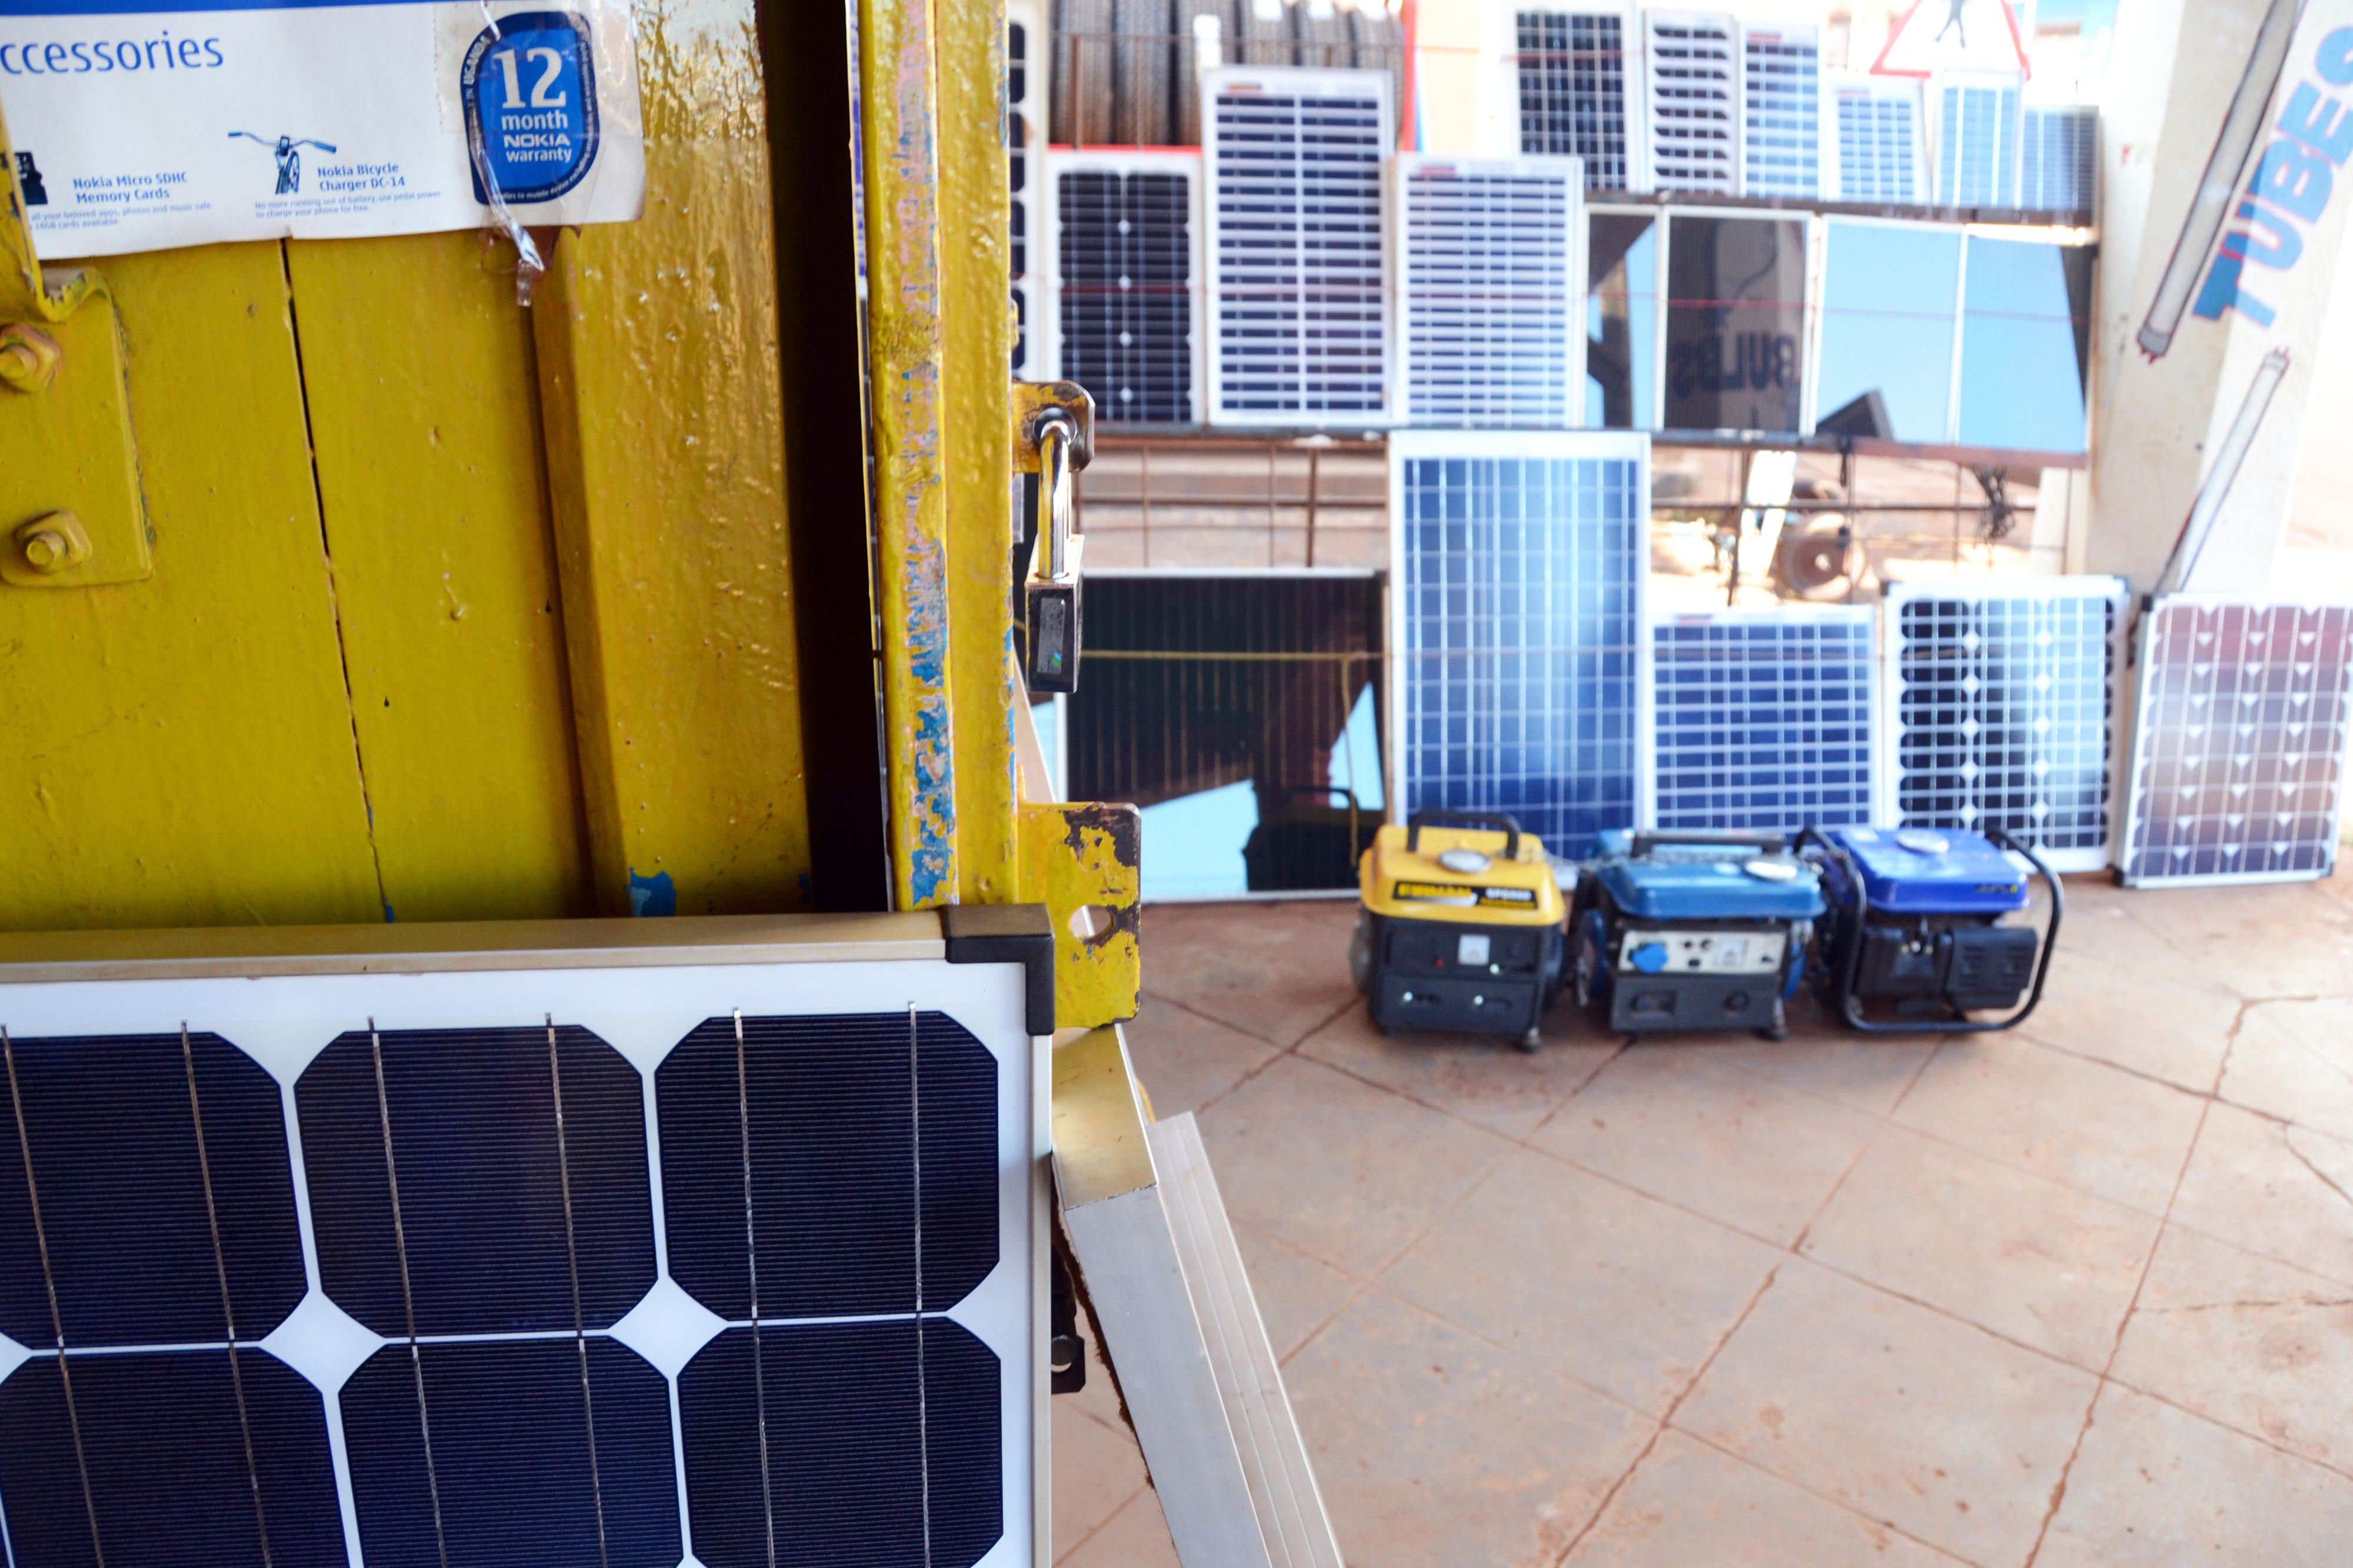 Shop in Uganda selling solar panels and solar accessories